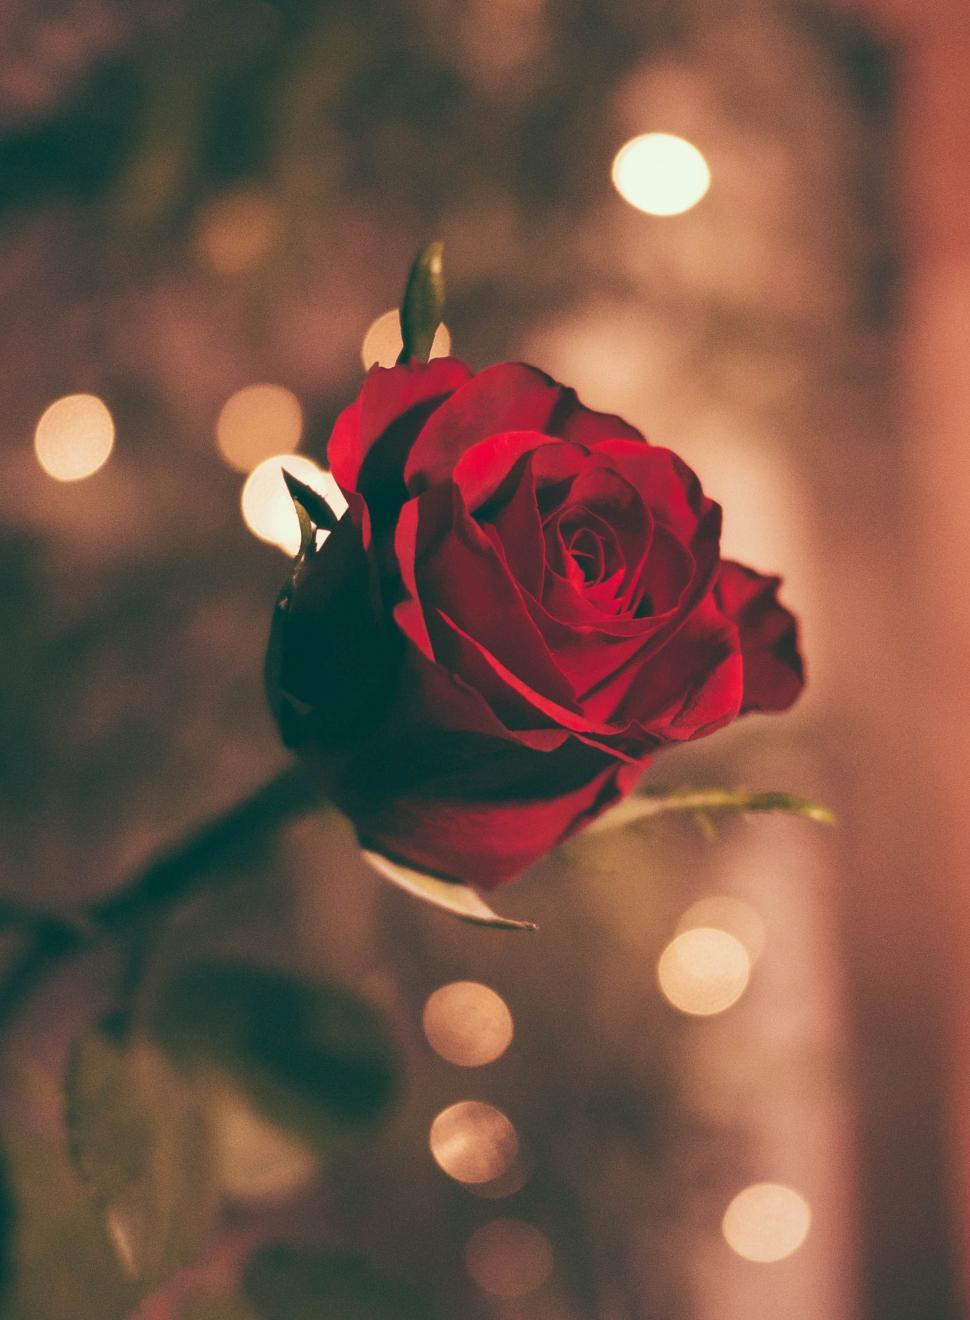 Free Image of A Single Red Rose on a Table 